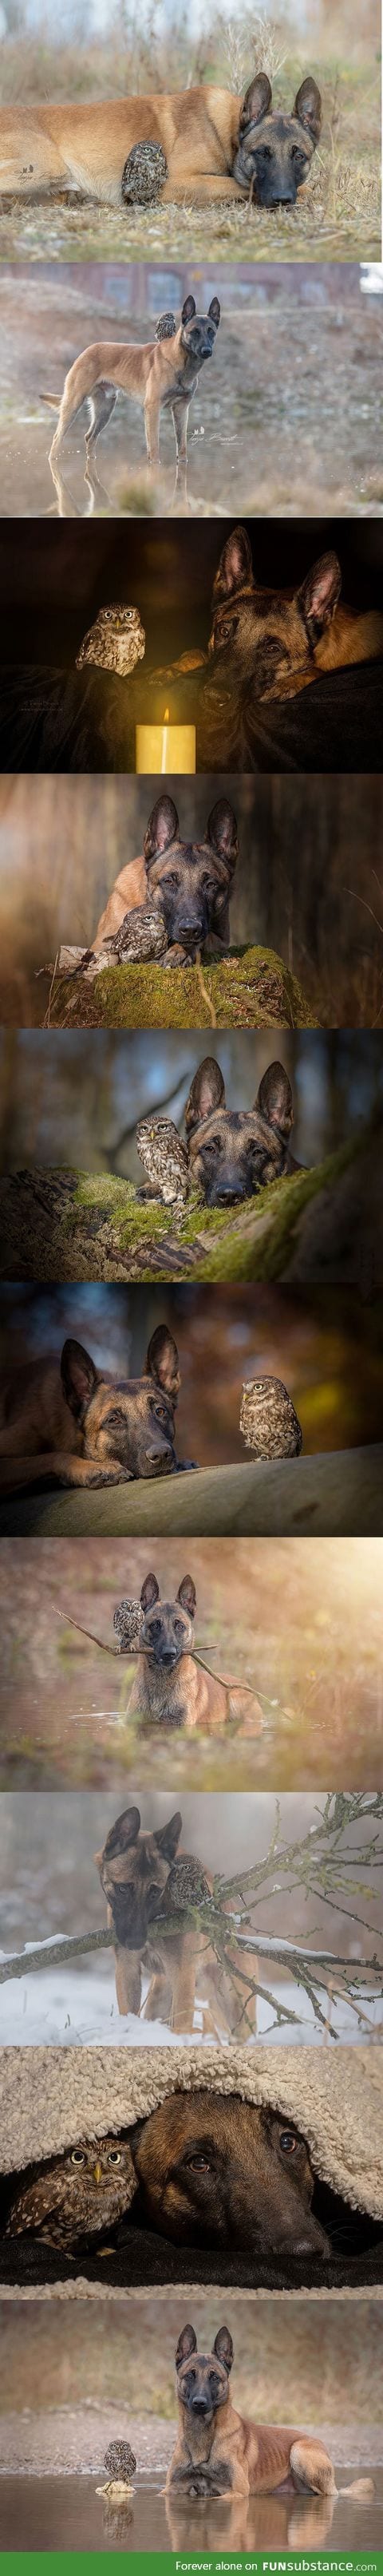 Best friends owl and dog